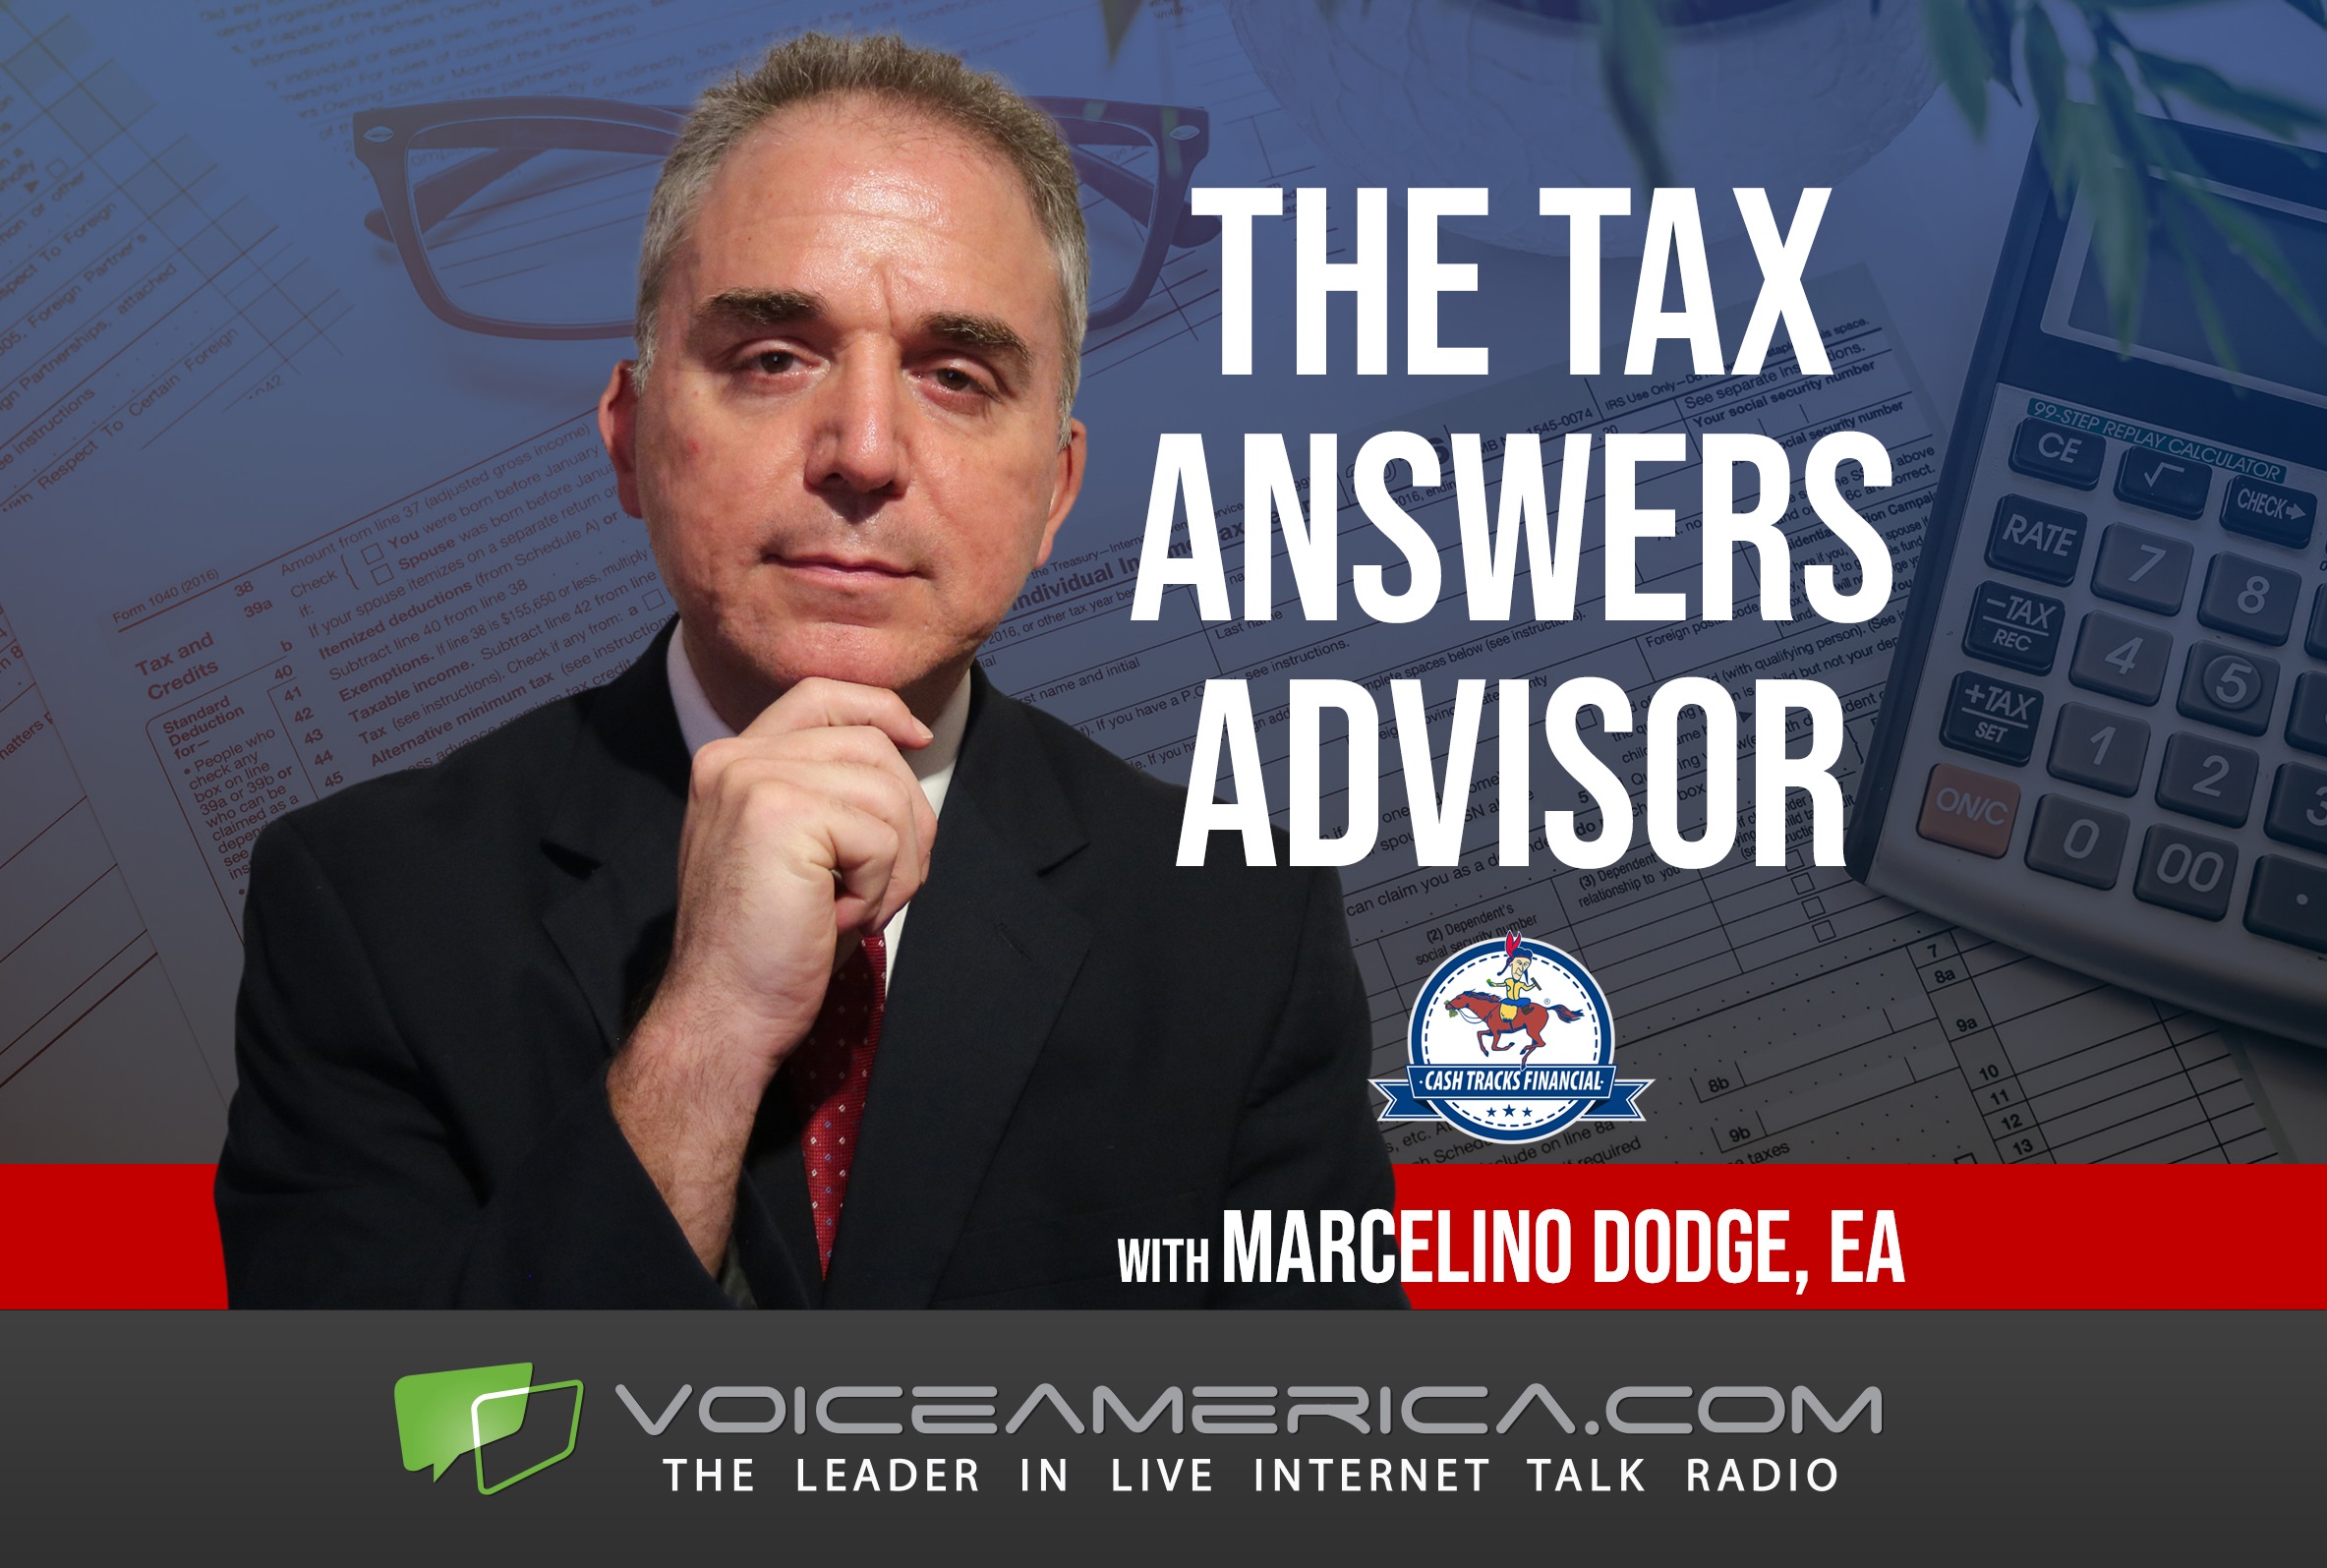 Can the IRS Balance Enforcement and Provide Taxpayer Service?